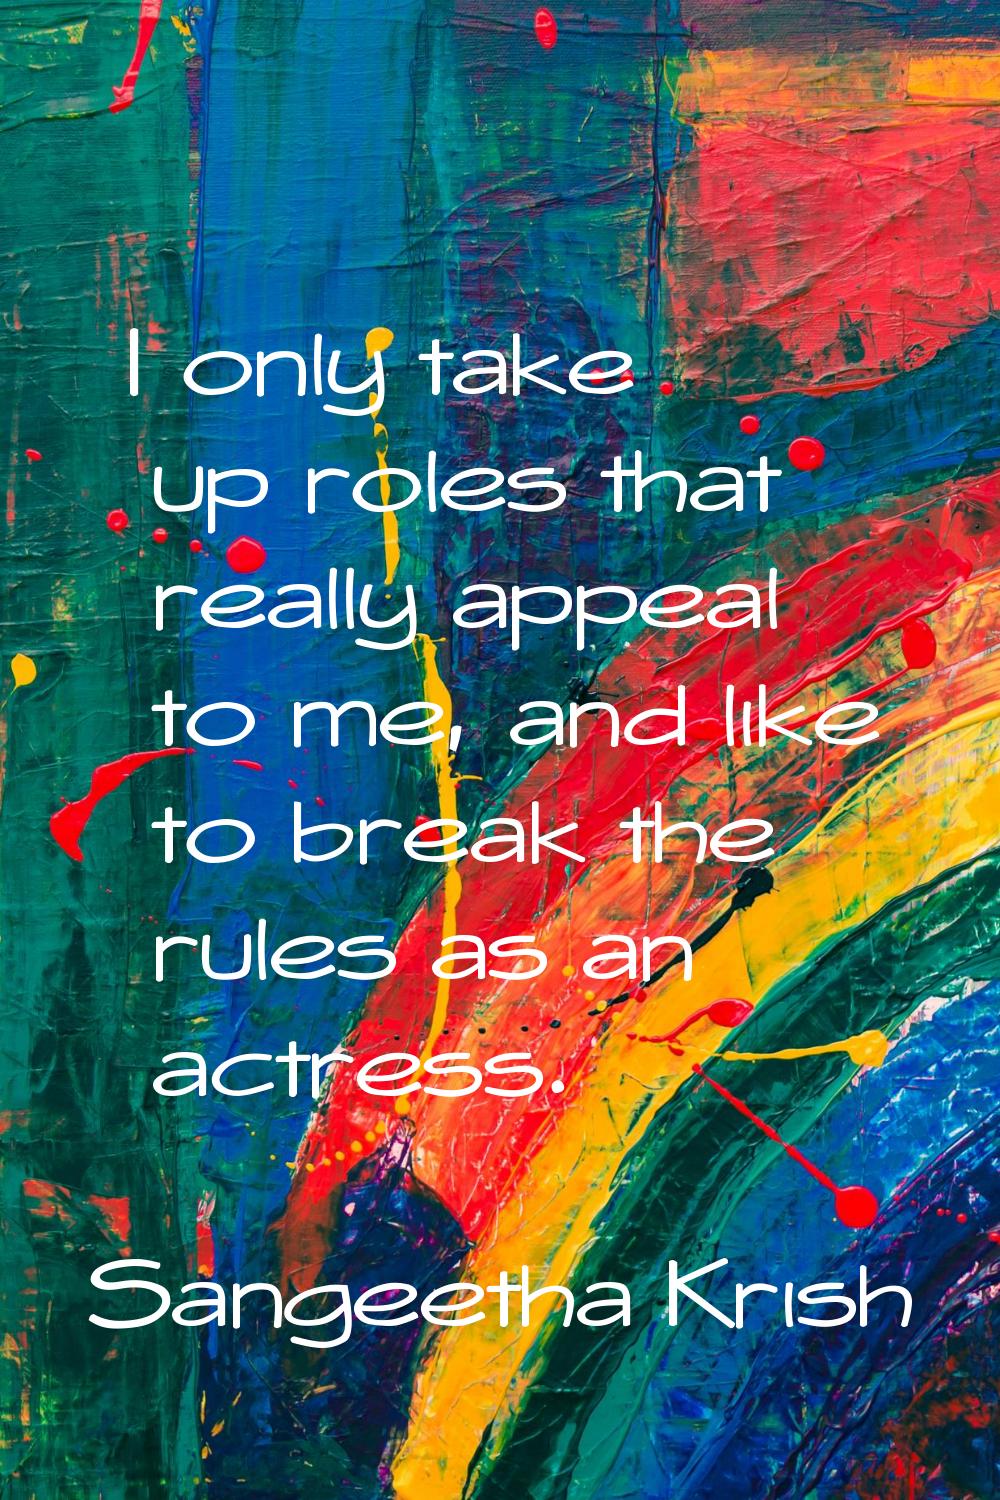 I only take up roles that really appeal to me, and like to break the rules as an actress.